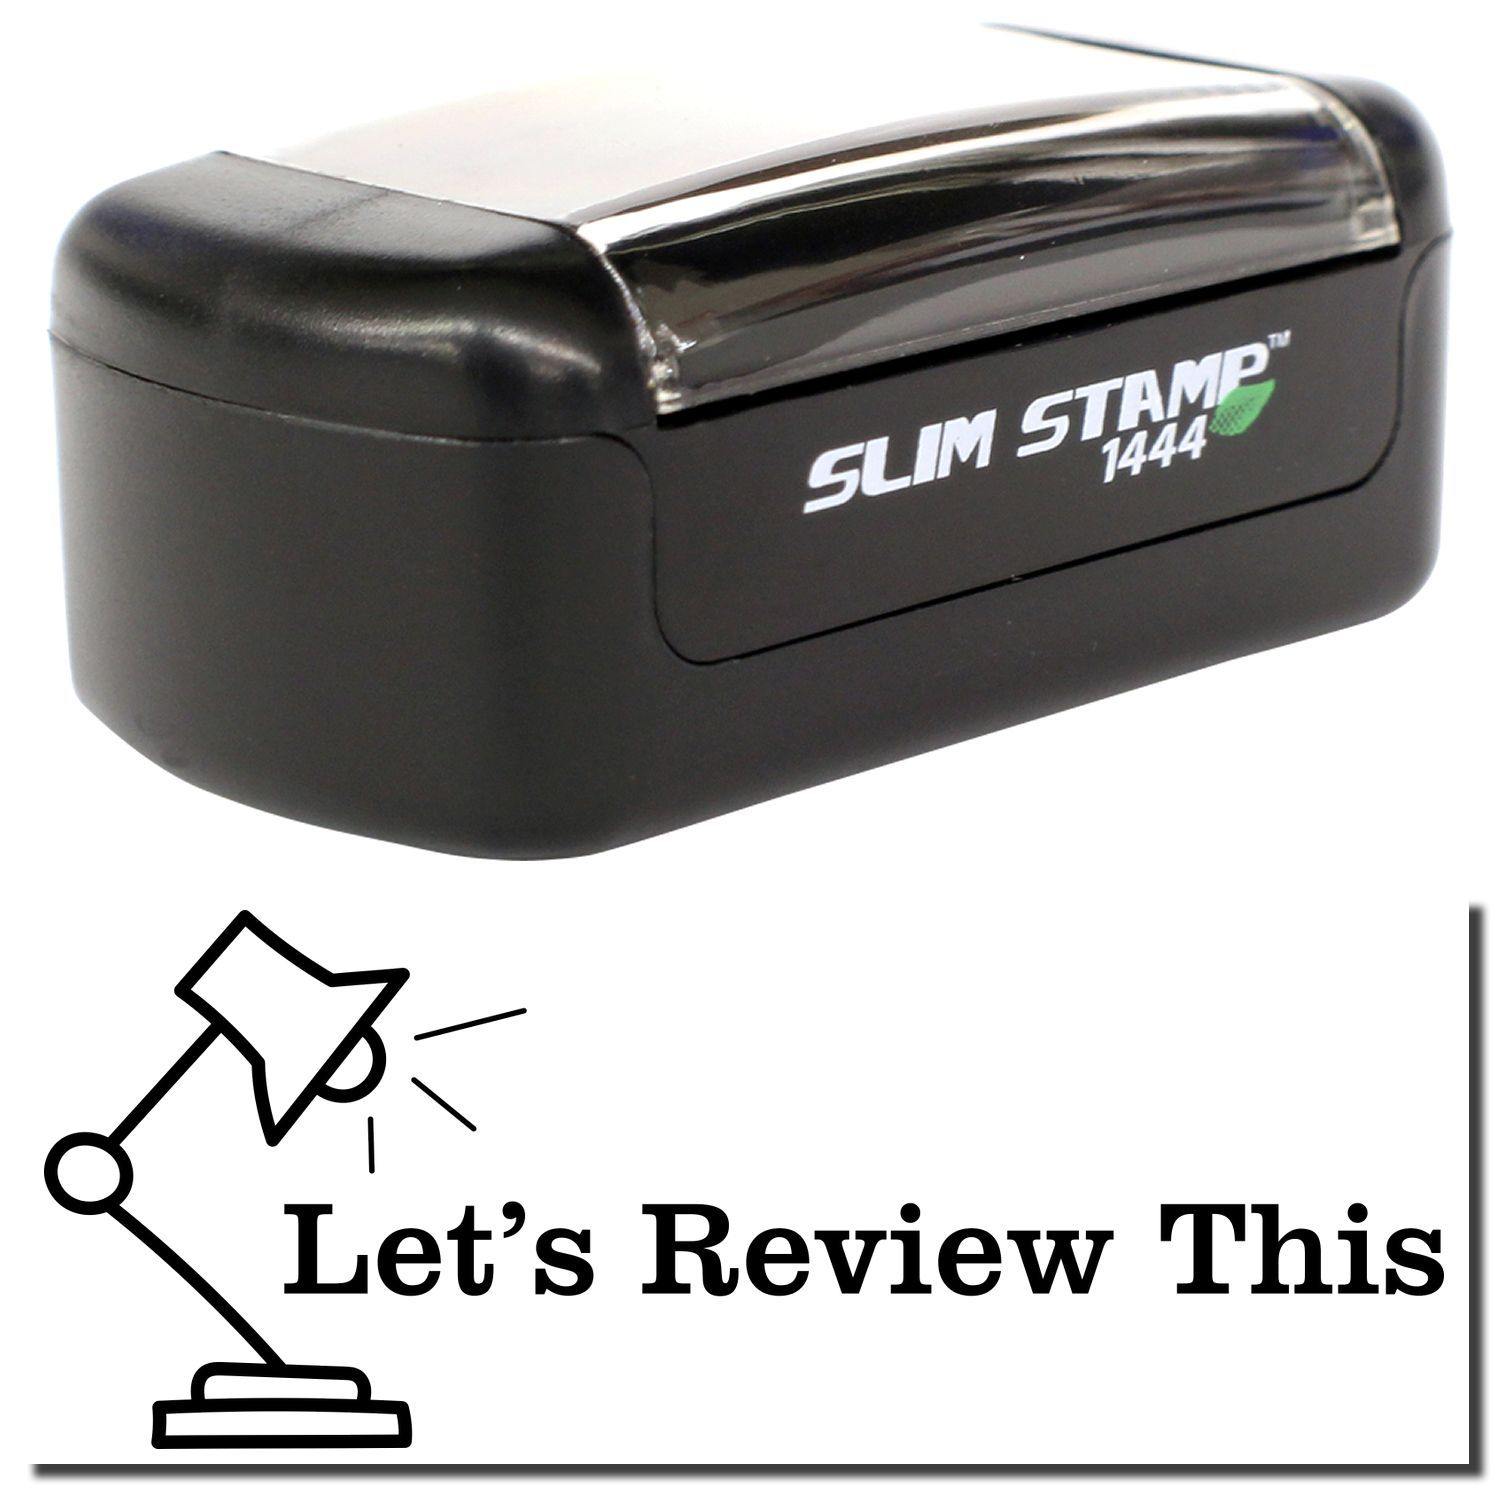 A stock office pre-inked stamp with a stamped image showing how the text "LET'S REVIEW THIS" with a lamp image on the left side is displayed after stamping.